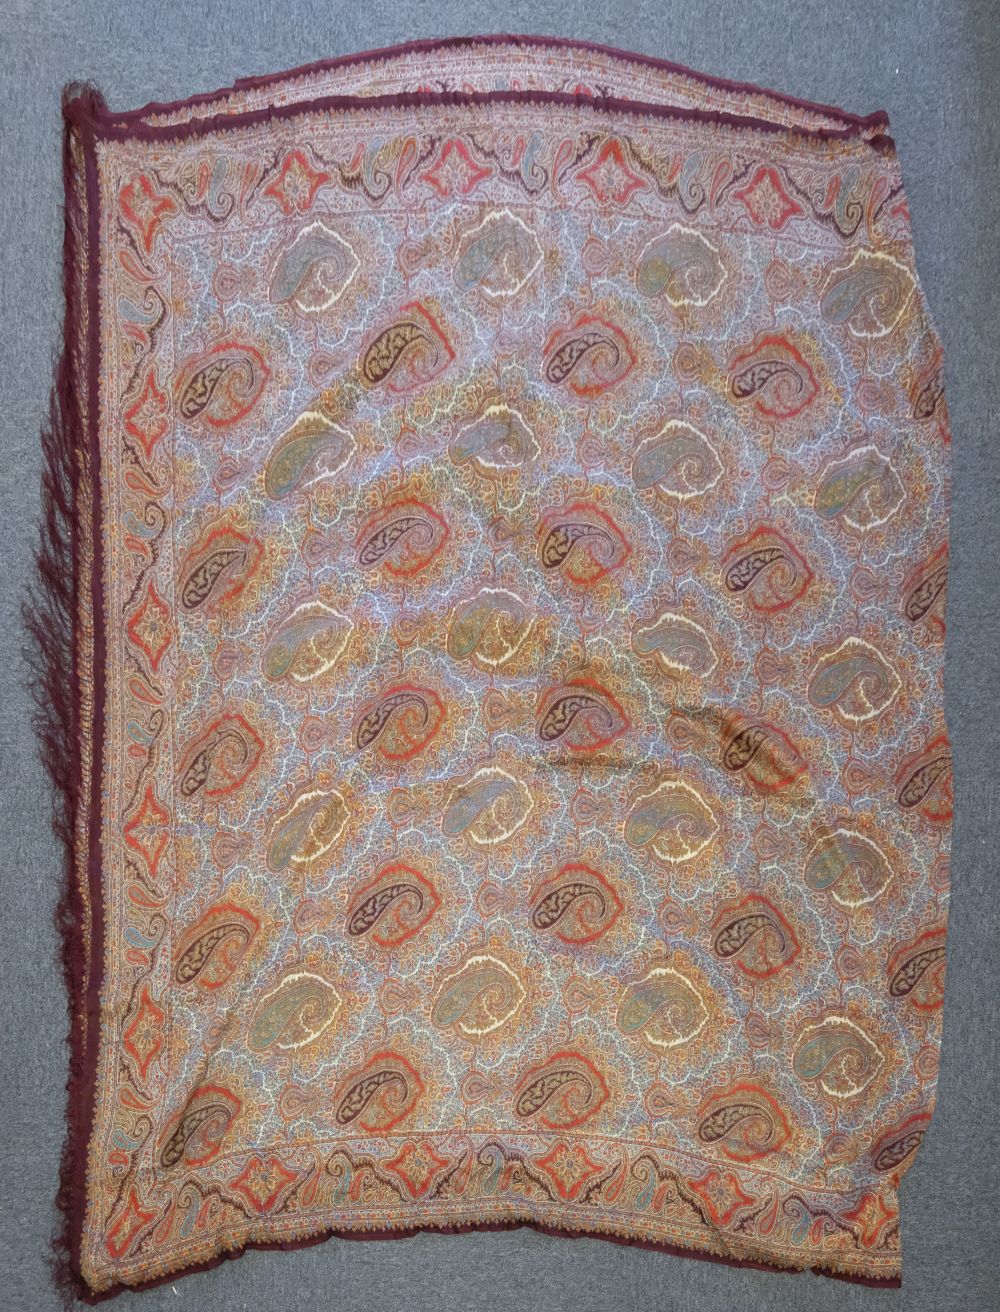 Lot 286 - Shawls. A pair of early-mid 19th century